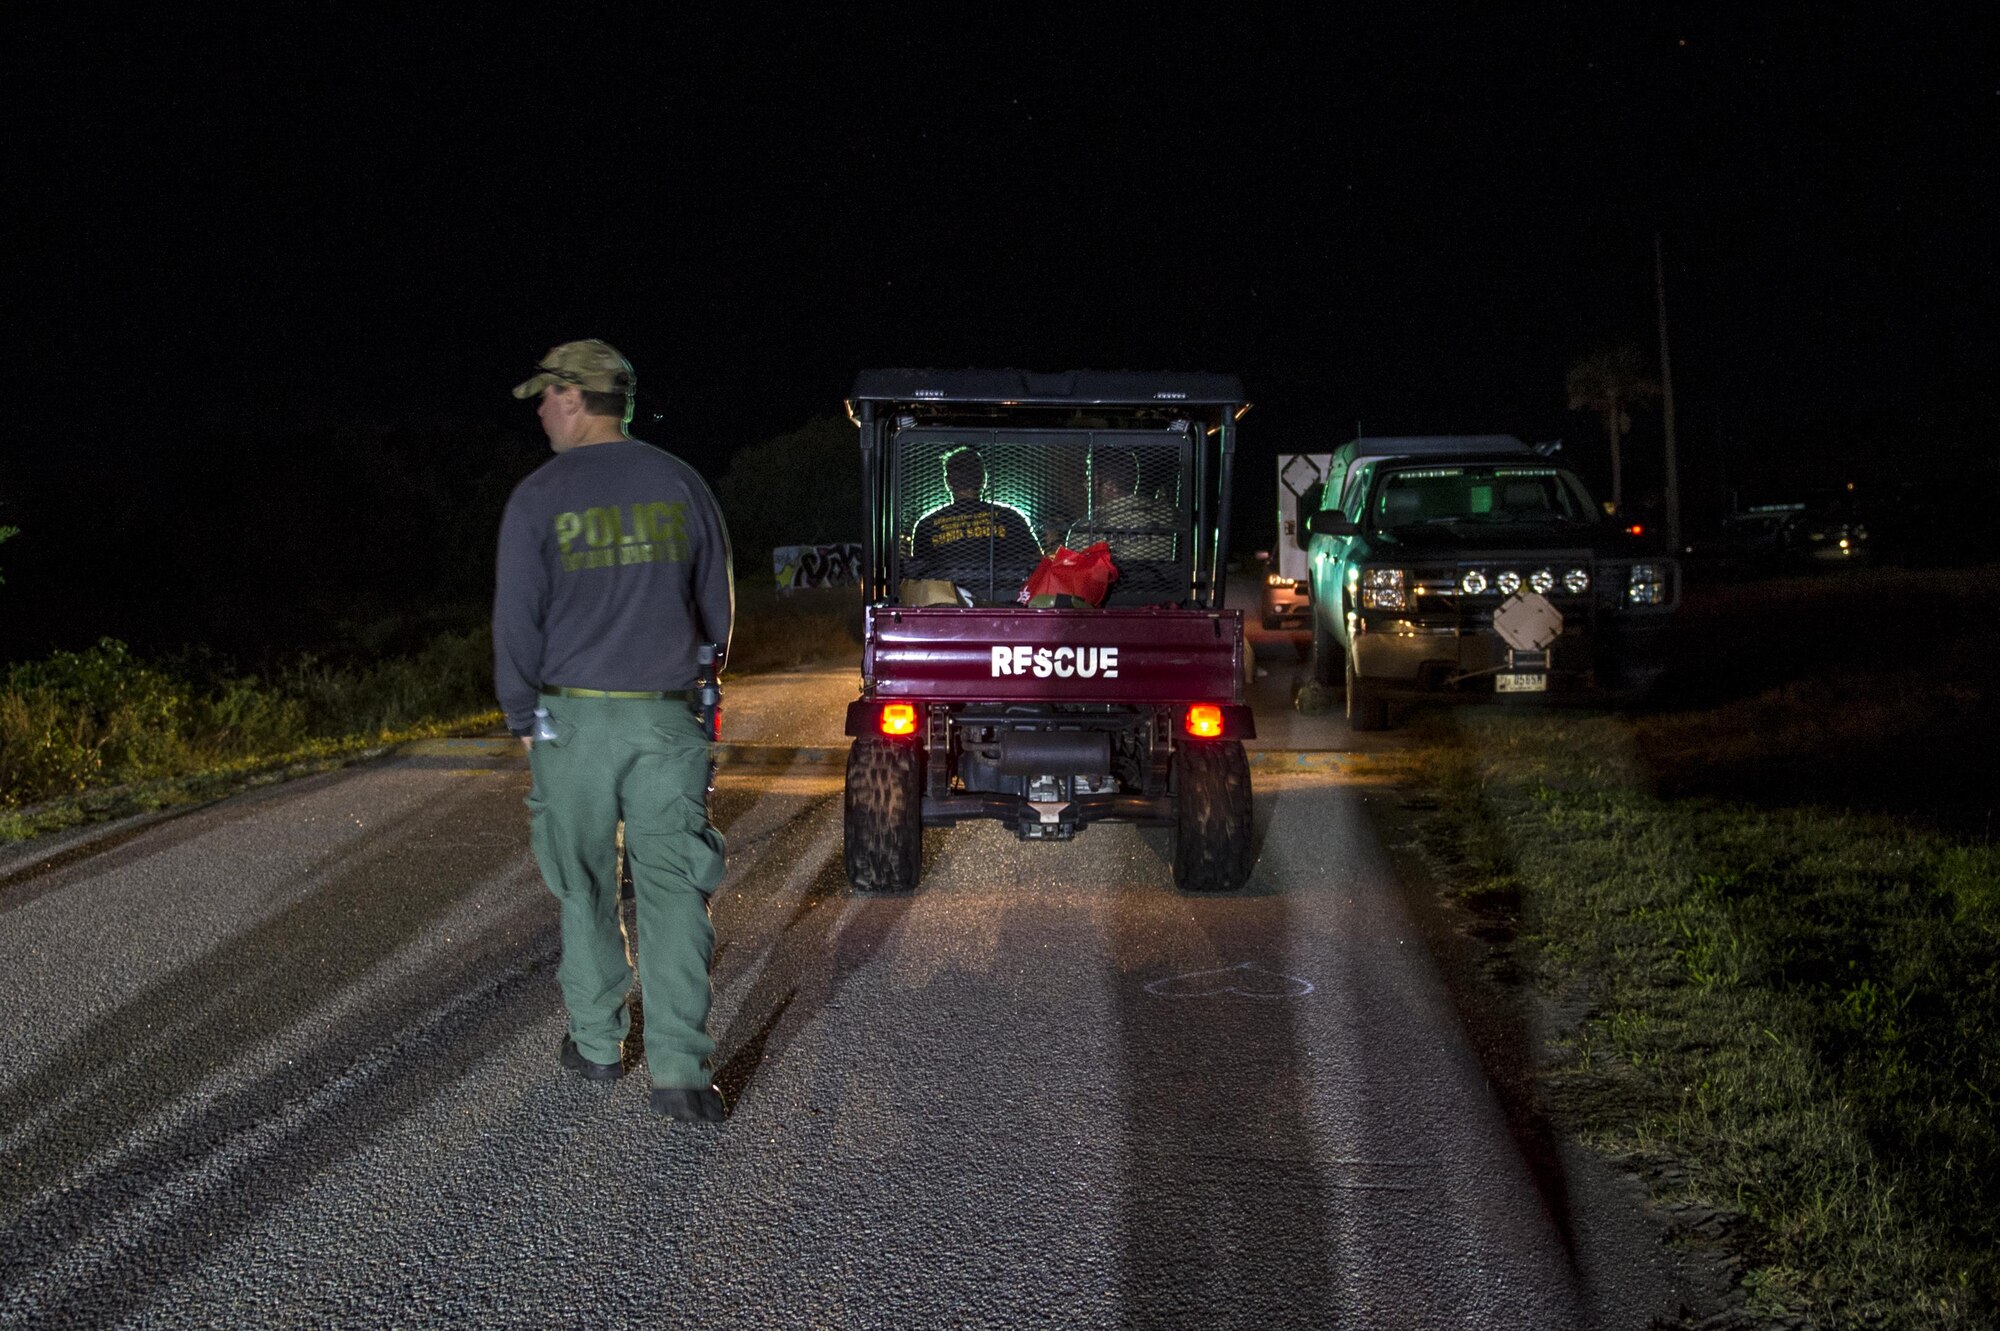 U.S. Air Force Explosive Ordnance Disposal technicians work with local law enforcement bomb squad members to transport Civil War cannonballs washed ashore from  Hurricane Matthew to a safe location at Folly Beach, S.C., Oct. 9, 2016. After the discovery of ordnance on the beach, local law enforcement and Air Force personnel worked together to properly dispose of the hazards. 